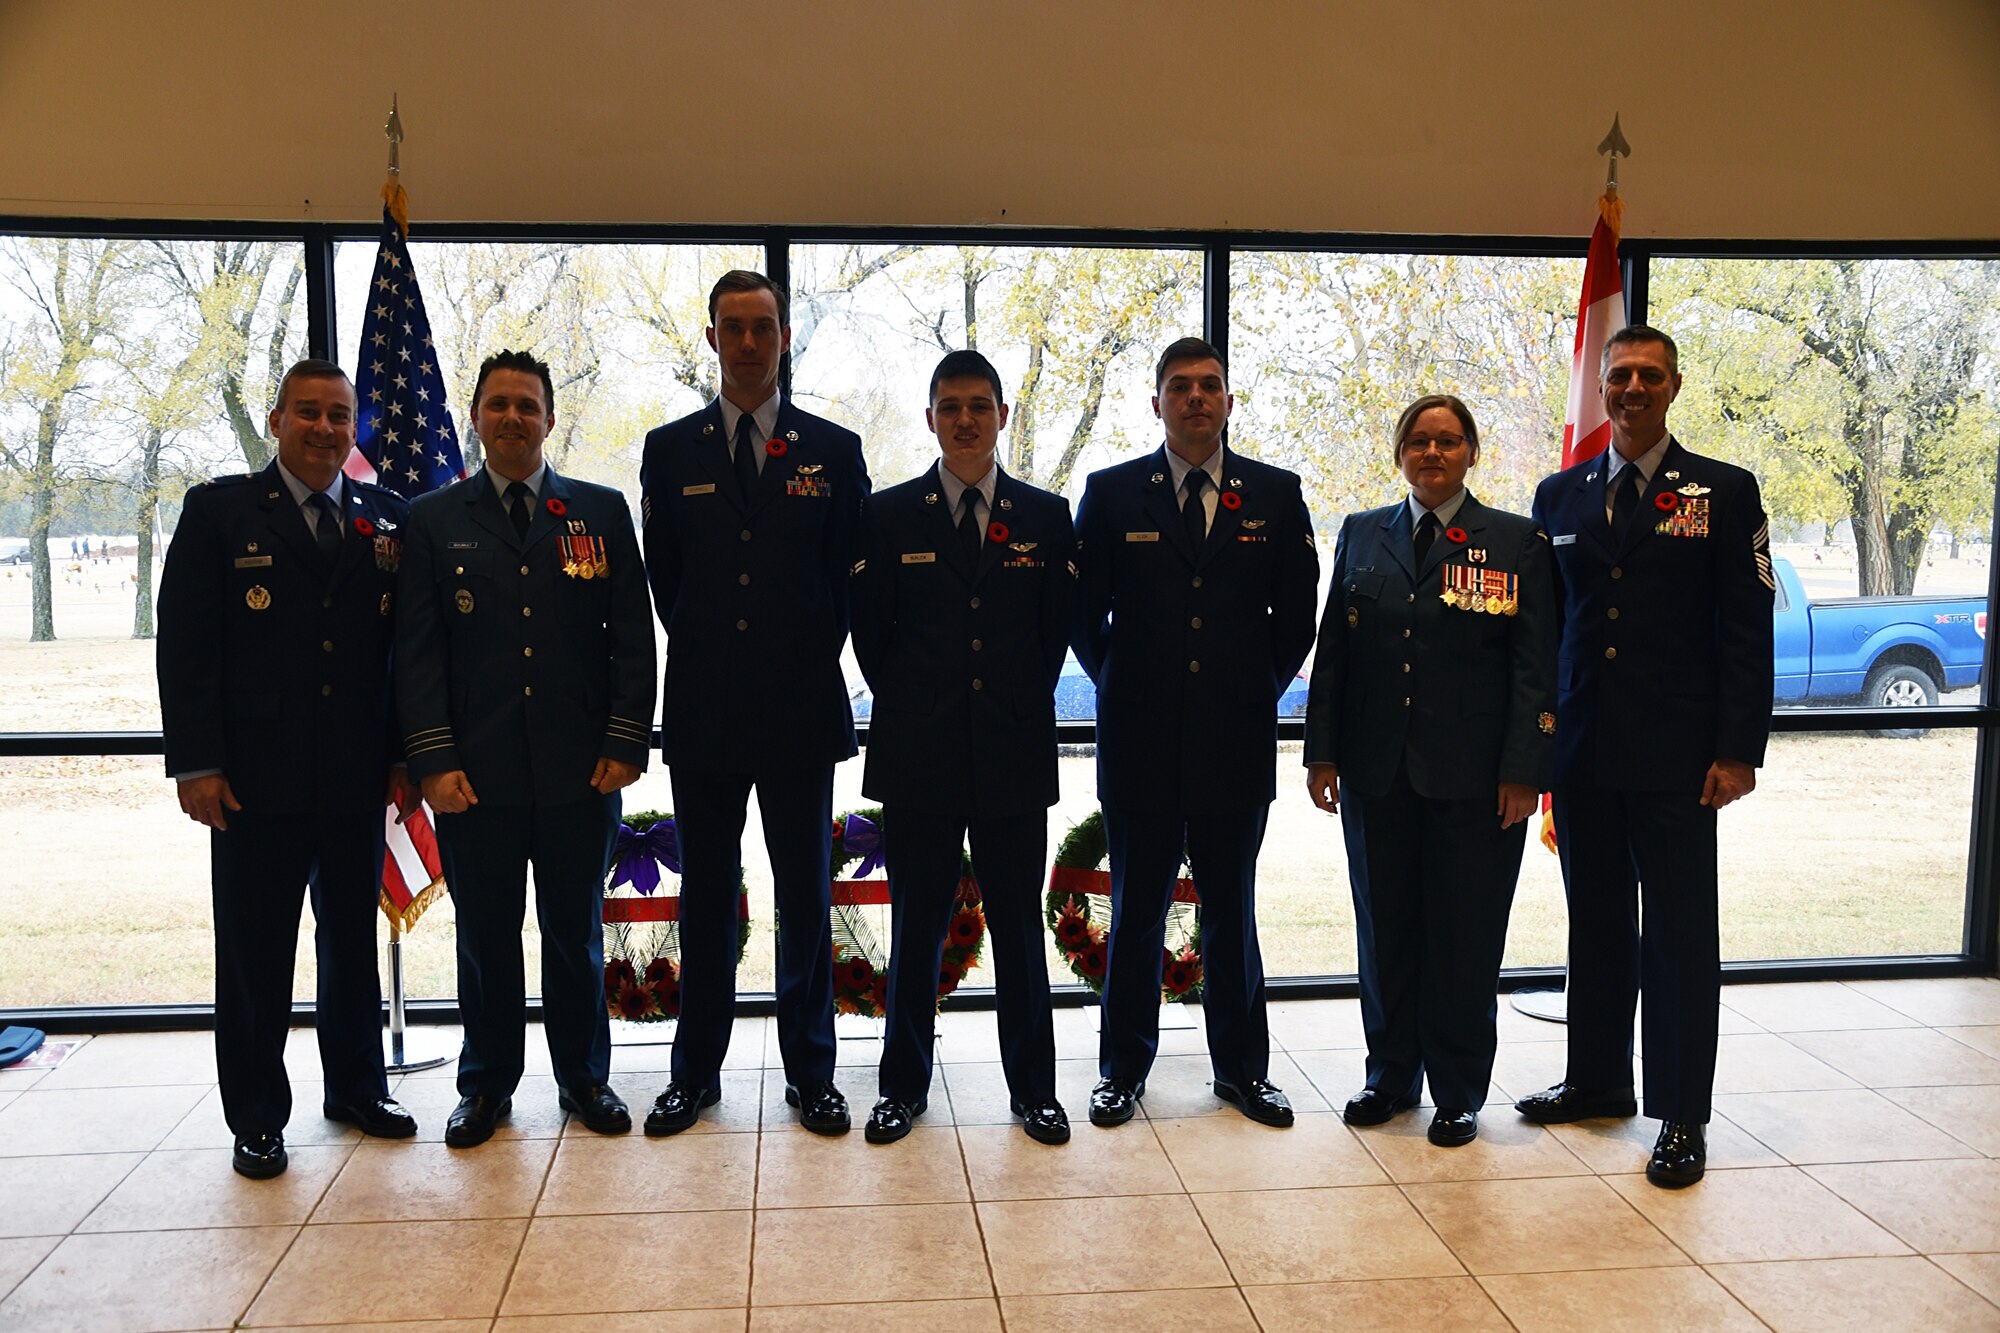 Lt. Col Shawn Guilbault, commander of the Canadian Detachment, Col. Alain Poisson, commander of the 552nd Air Control Wing, and Airmen of the 552nd ACW stand united as Canada honors their Remembrance Day.  Remembrance Day is a Canadian holiday held on Nov. 11 and marks the end of hostilities in World War I and serves as an opportunity to recall those who have served since.